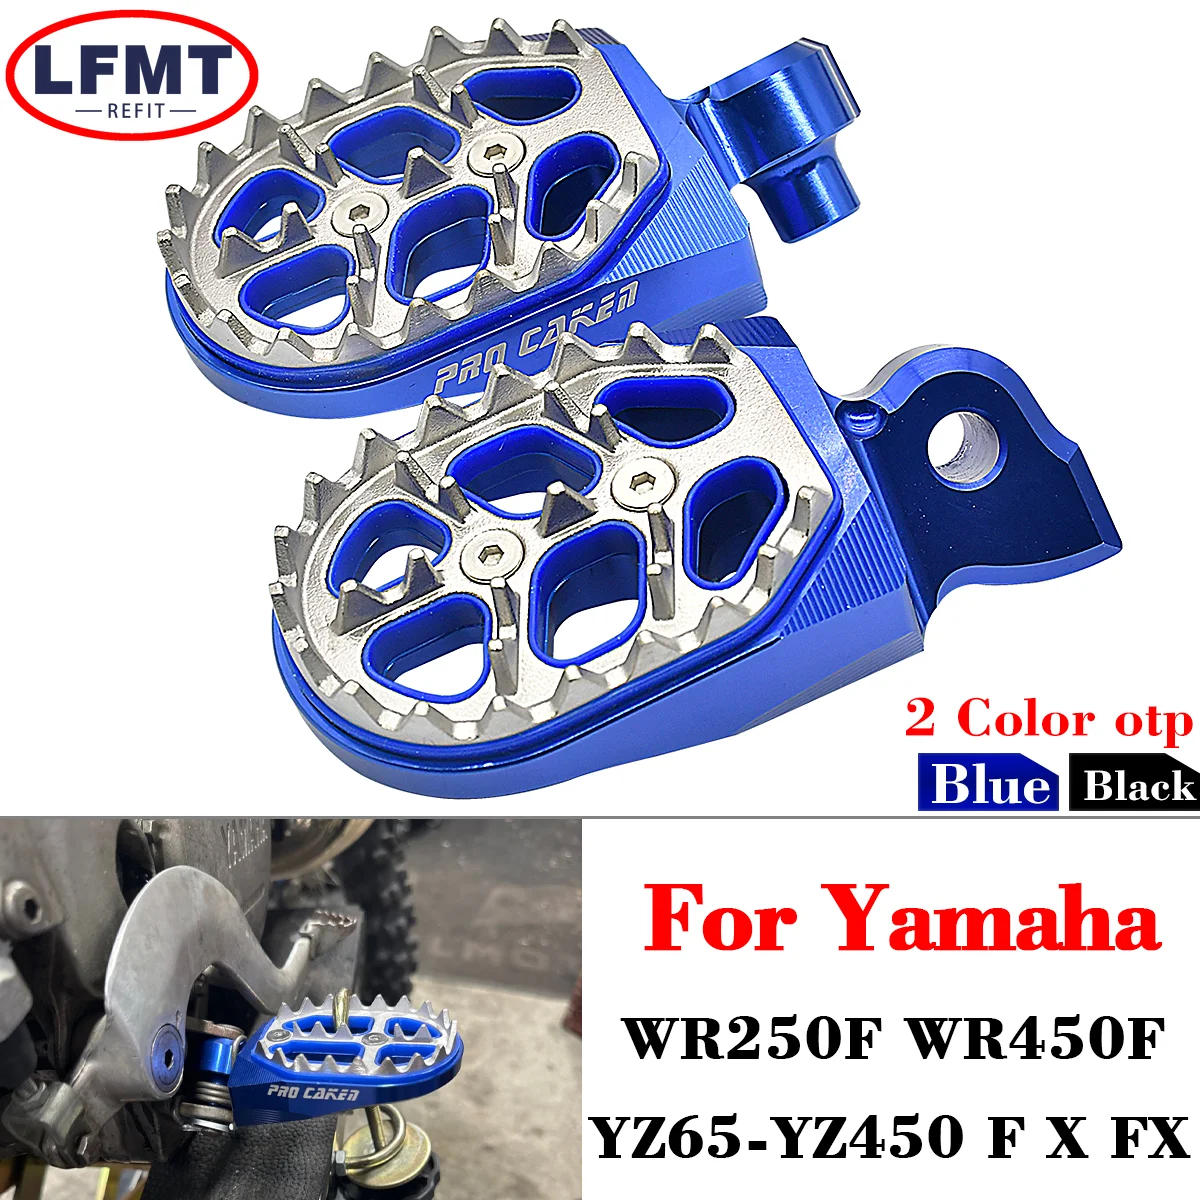 Motorcycle Foot Pegs Rests Footrest Footpeg Pedals For YAMAHA YZ 65 85 1... - $73.33